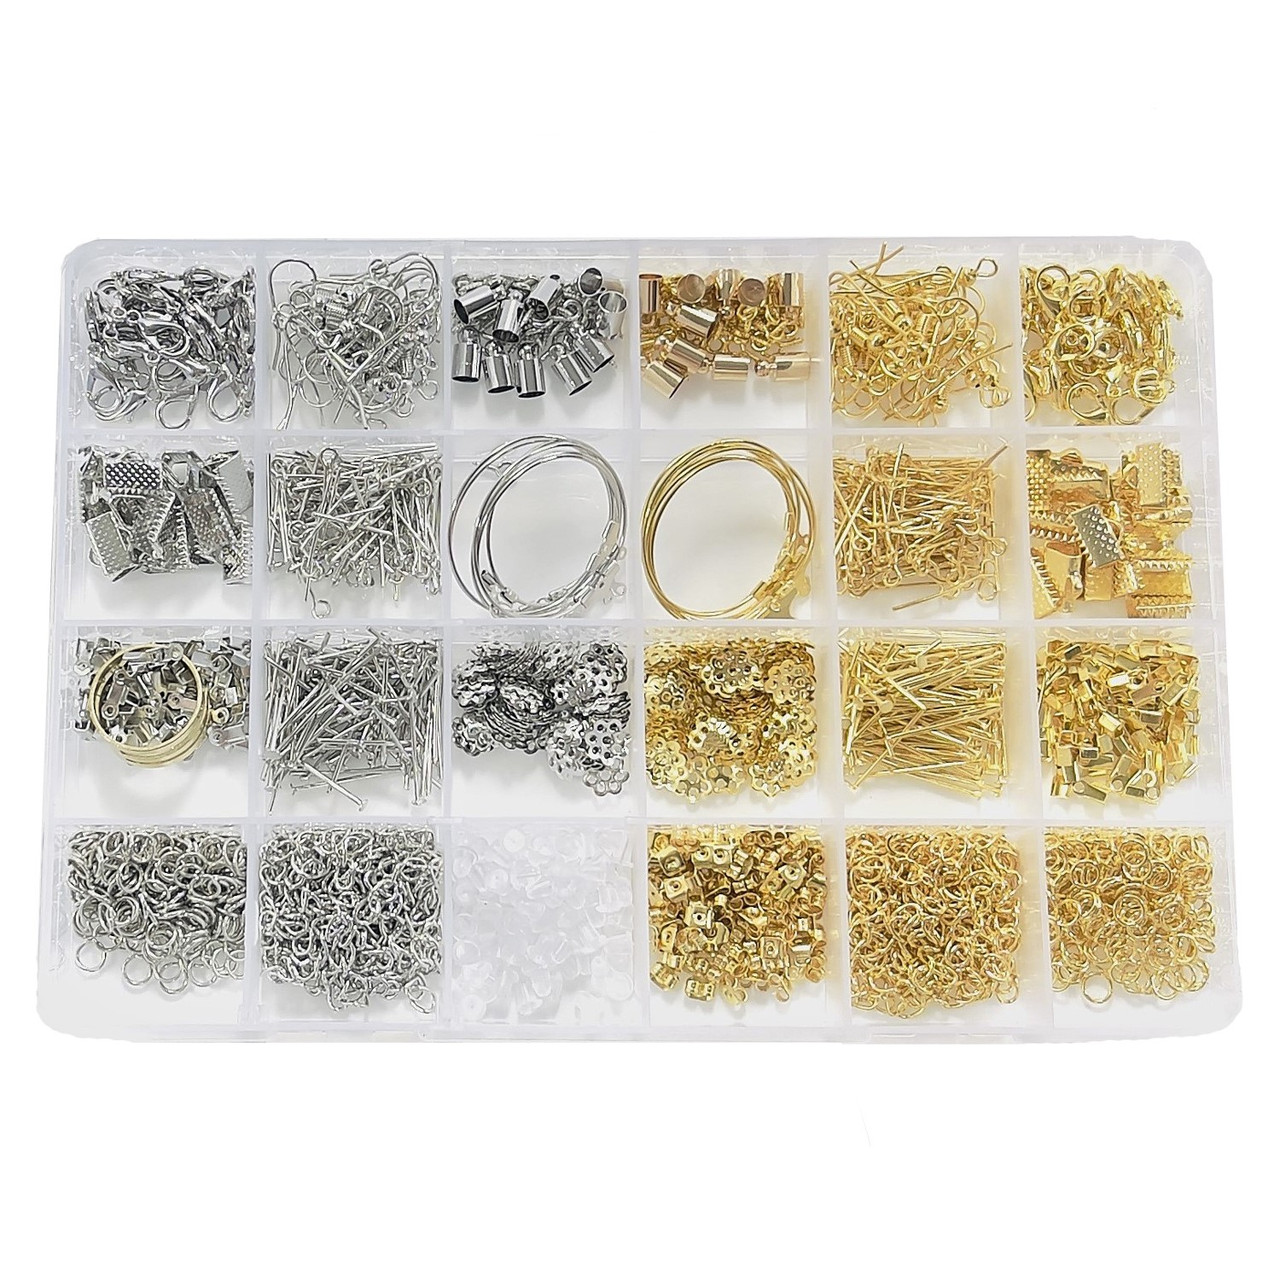 Expo International Jewelry 24 Gold/Silver Plated Items Findings Kit